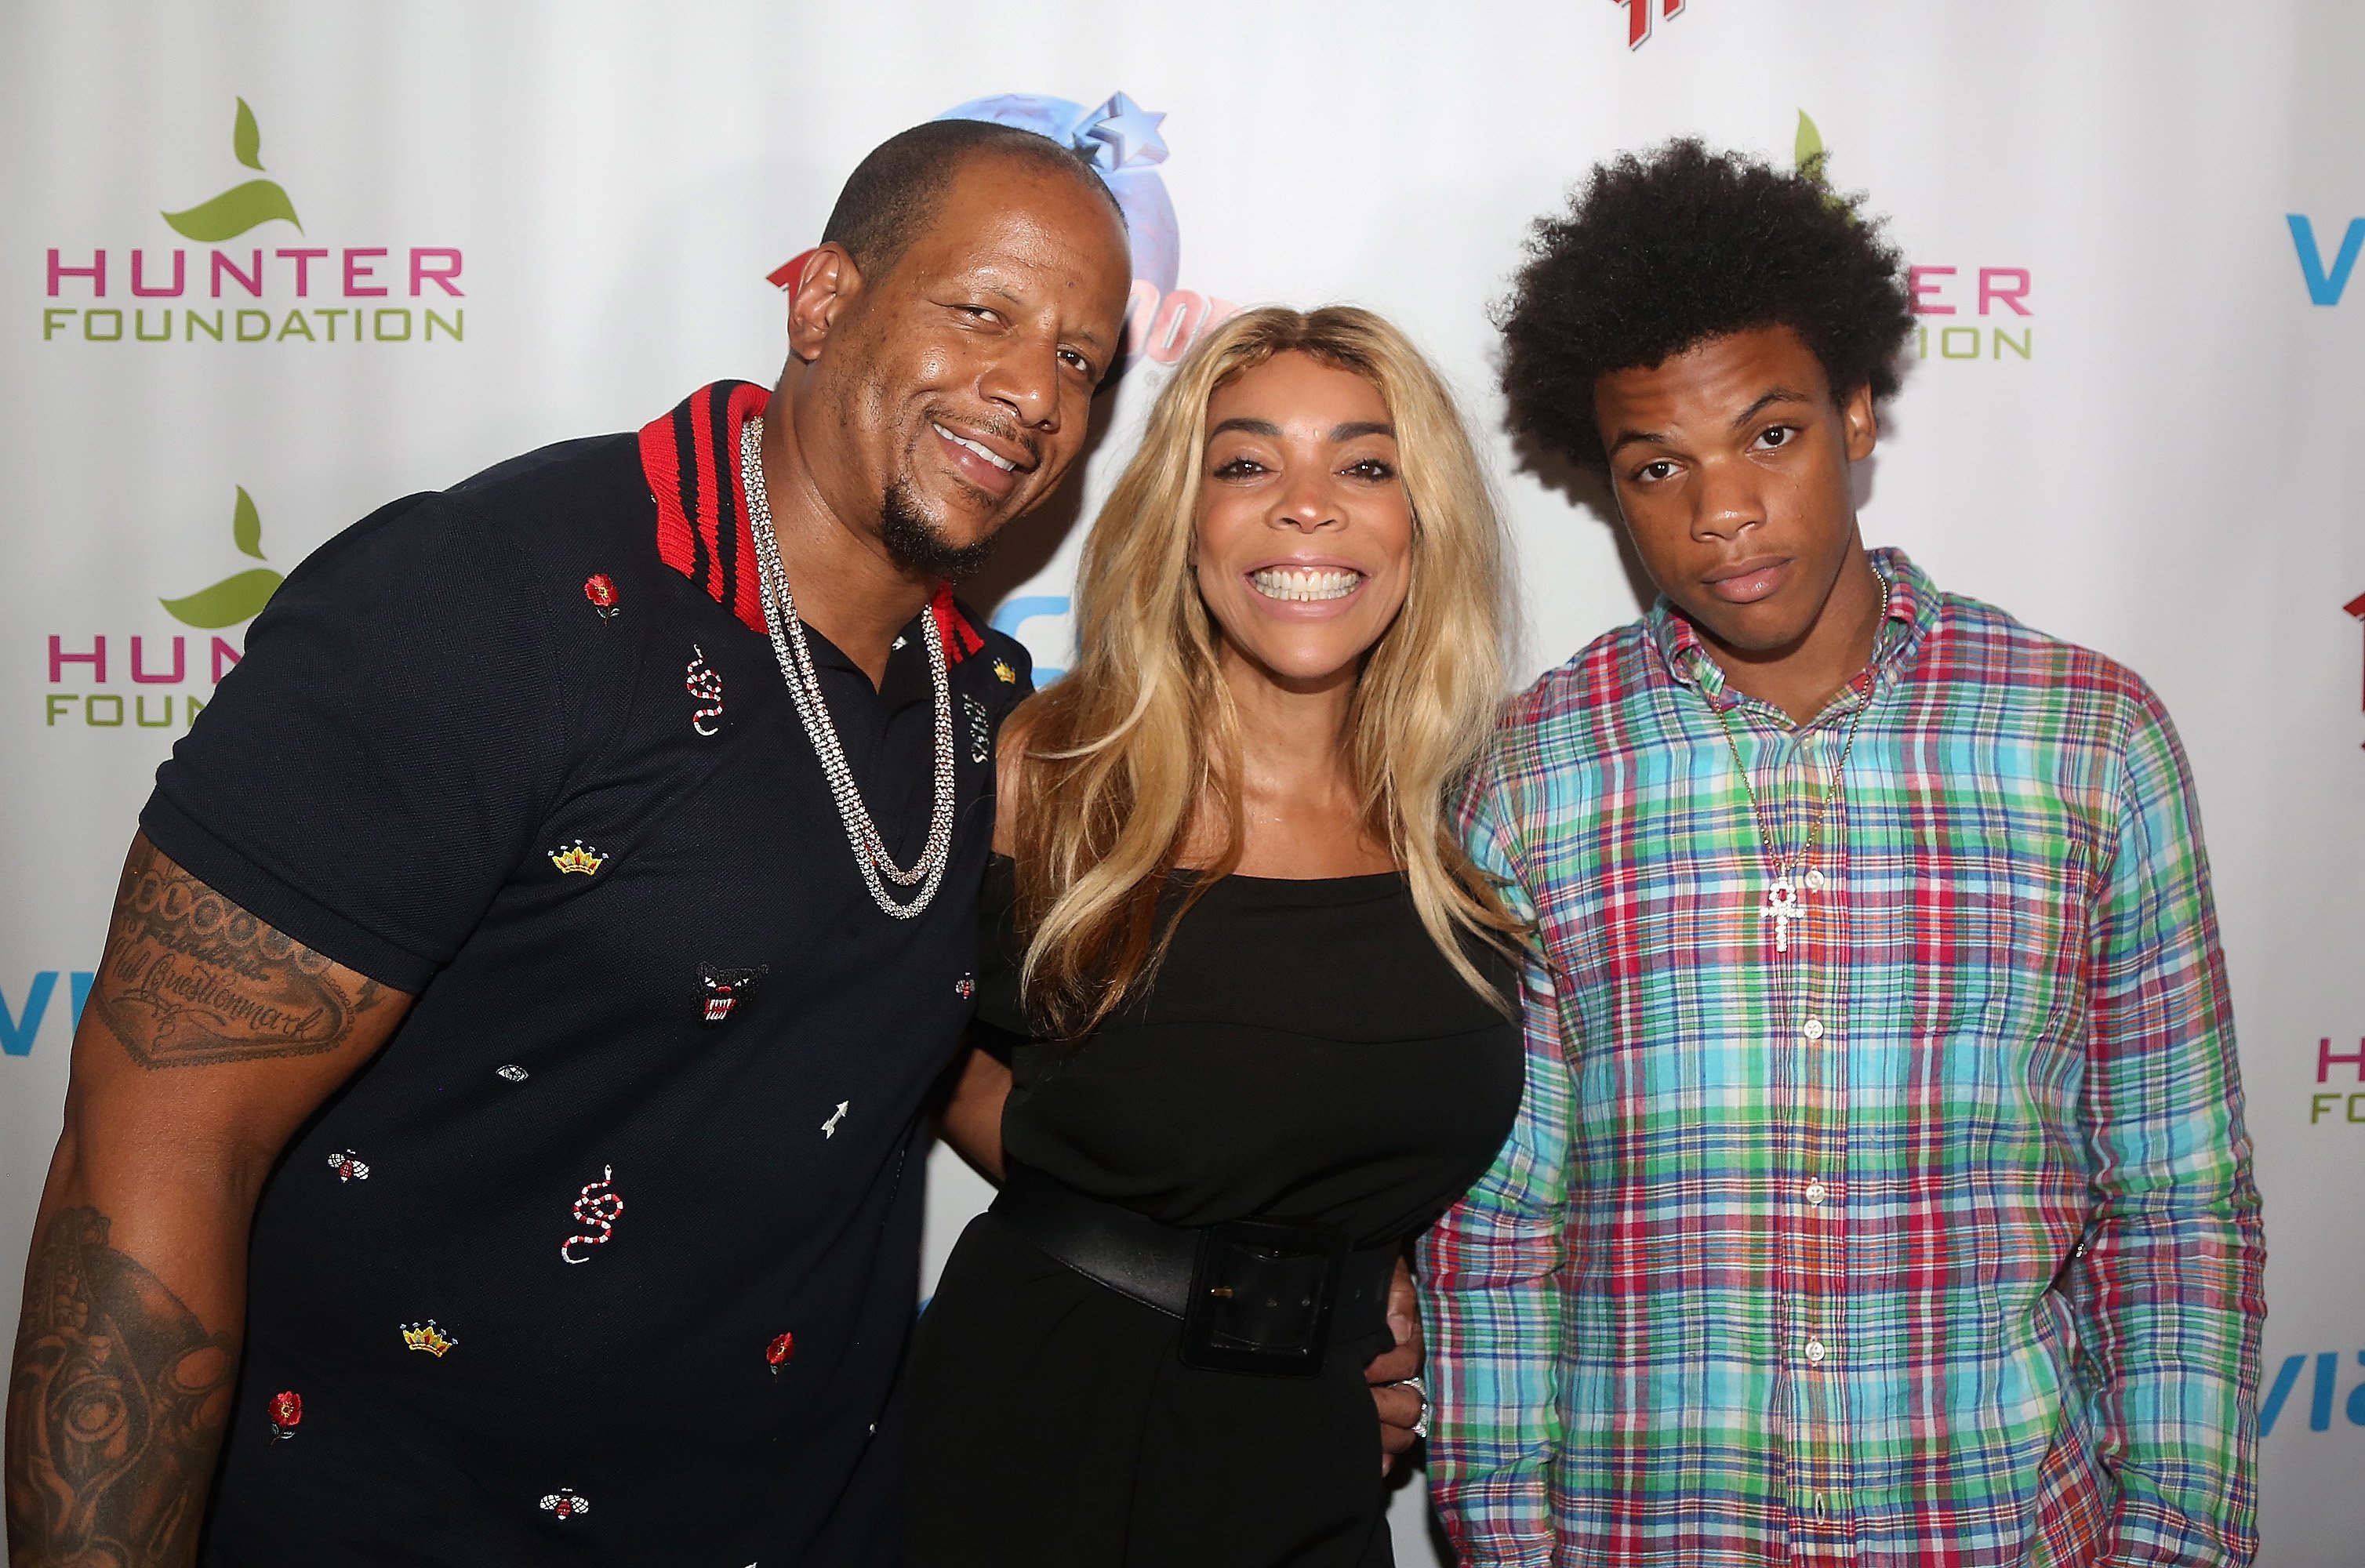 (L-R) Kevin Hunter Sr., Wendy Williams & their son Kevin Hunter Jr. in New York City on July 11, 2017 | Photo: Getty Images